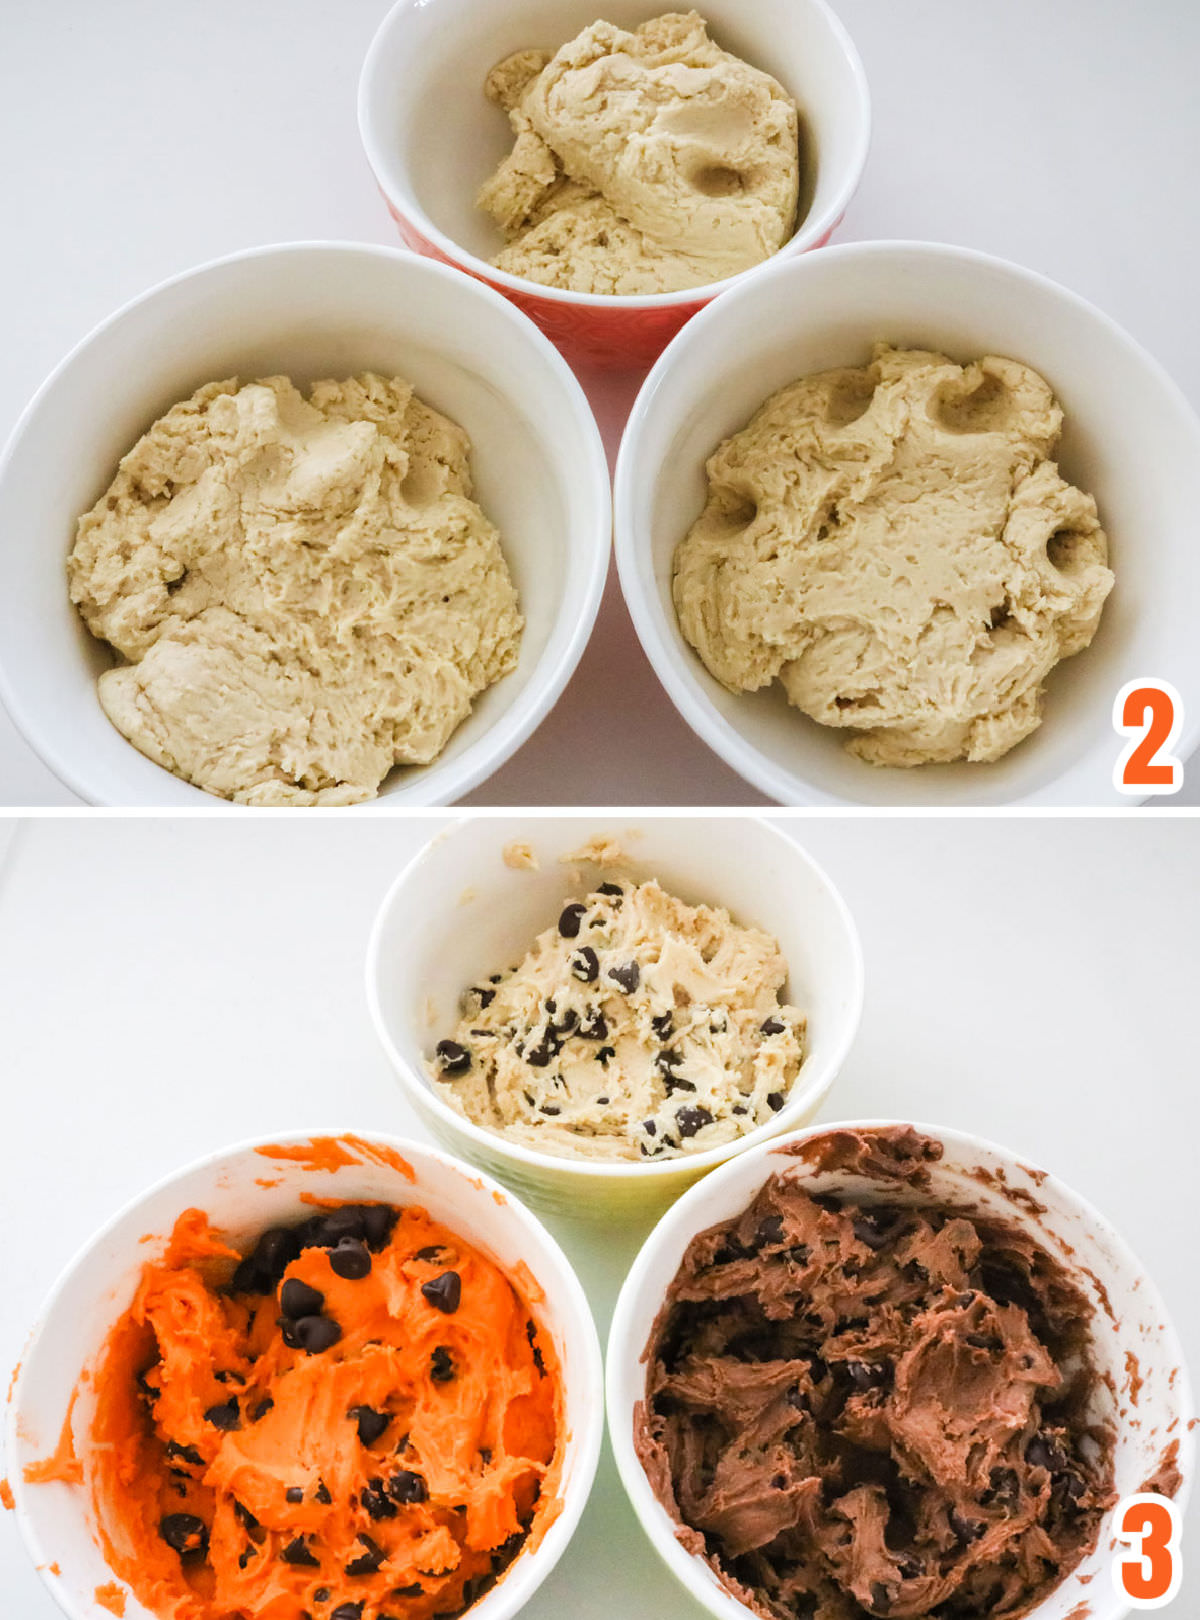 Collage image showing how to separate the cookie dough and color it orange, brown and white.